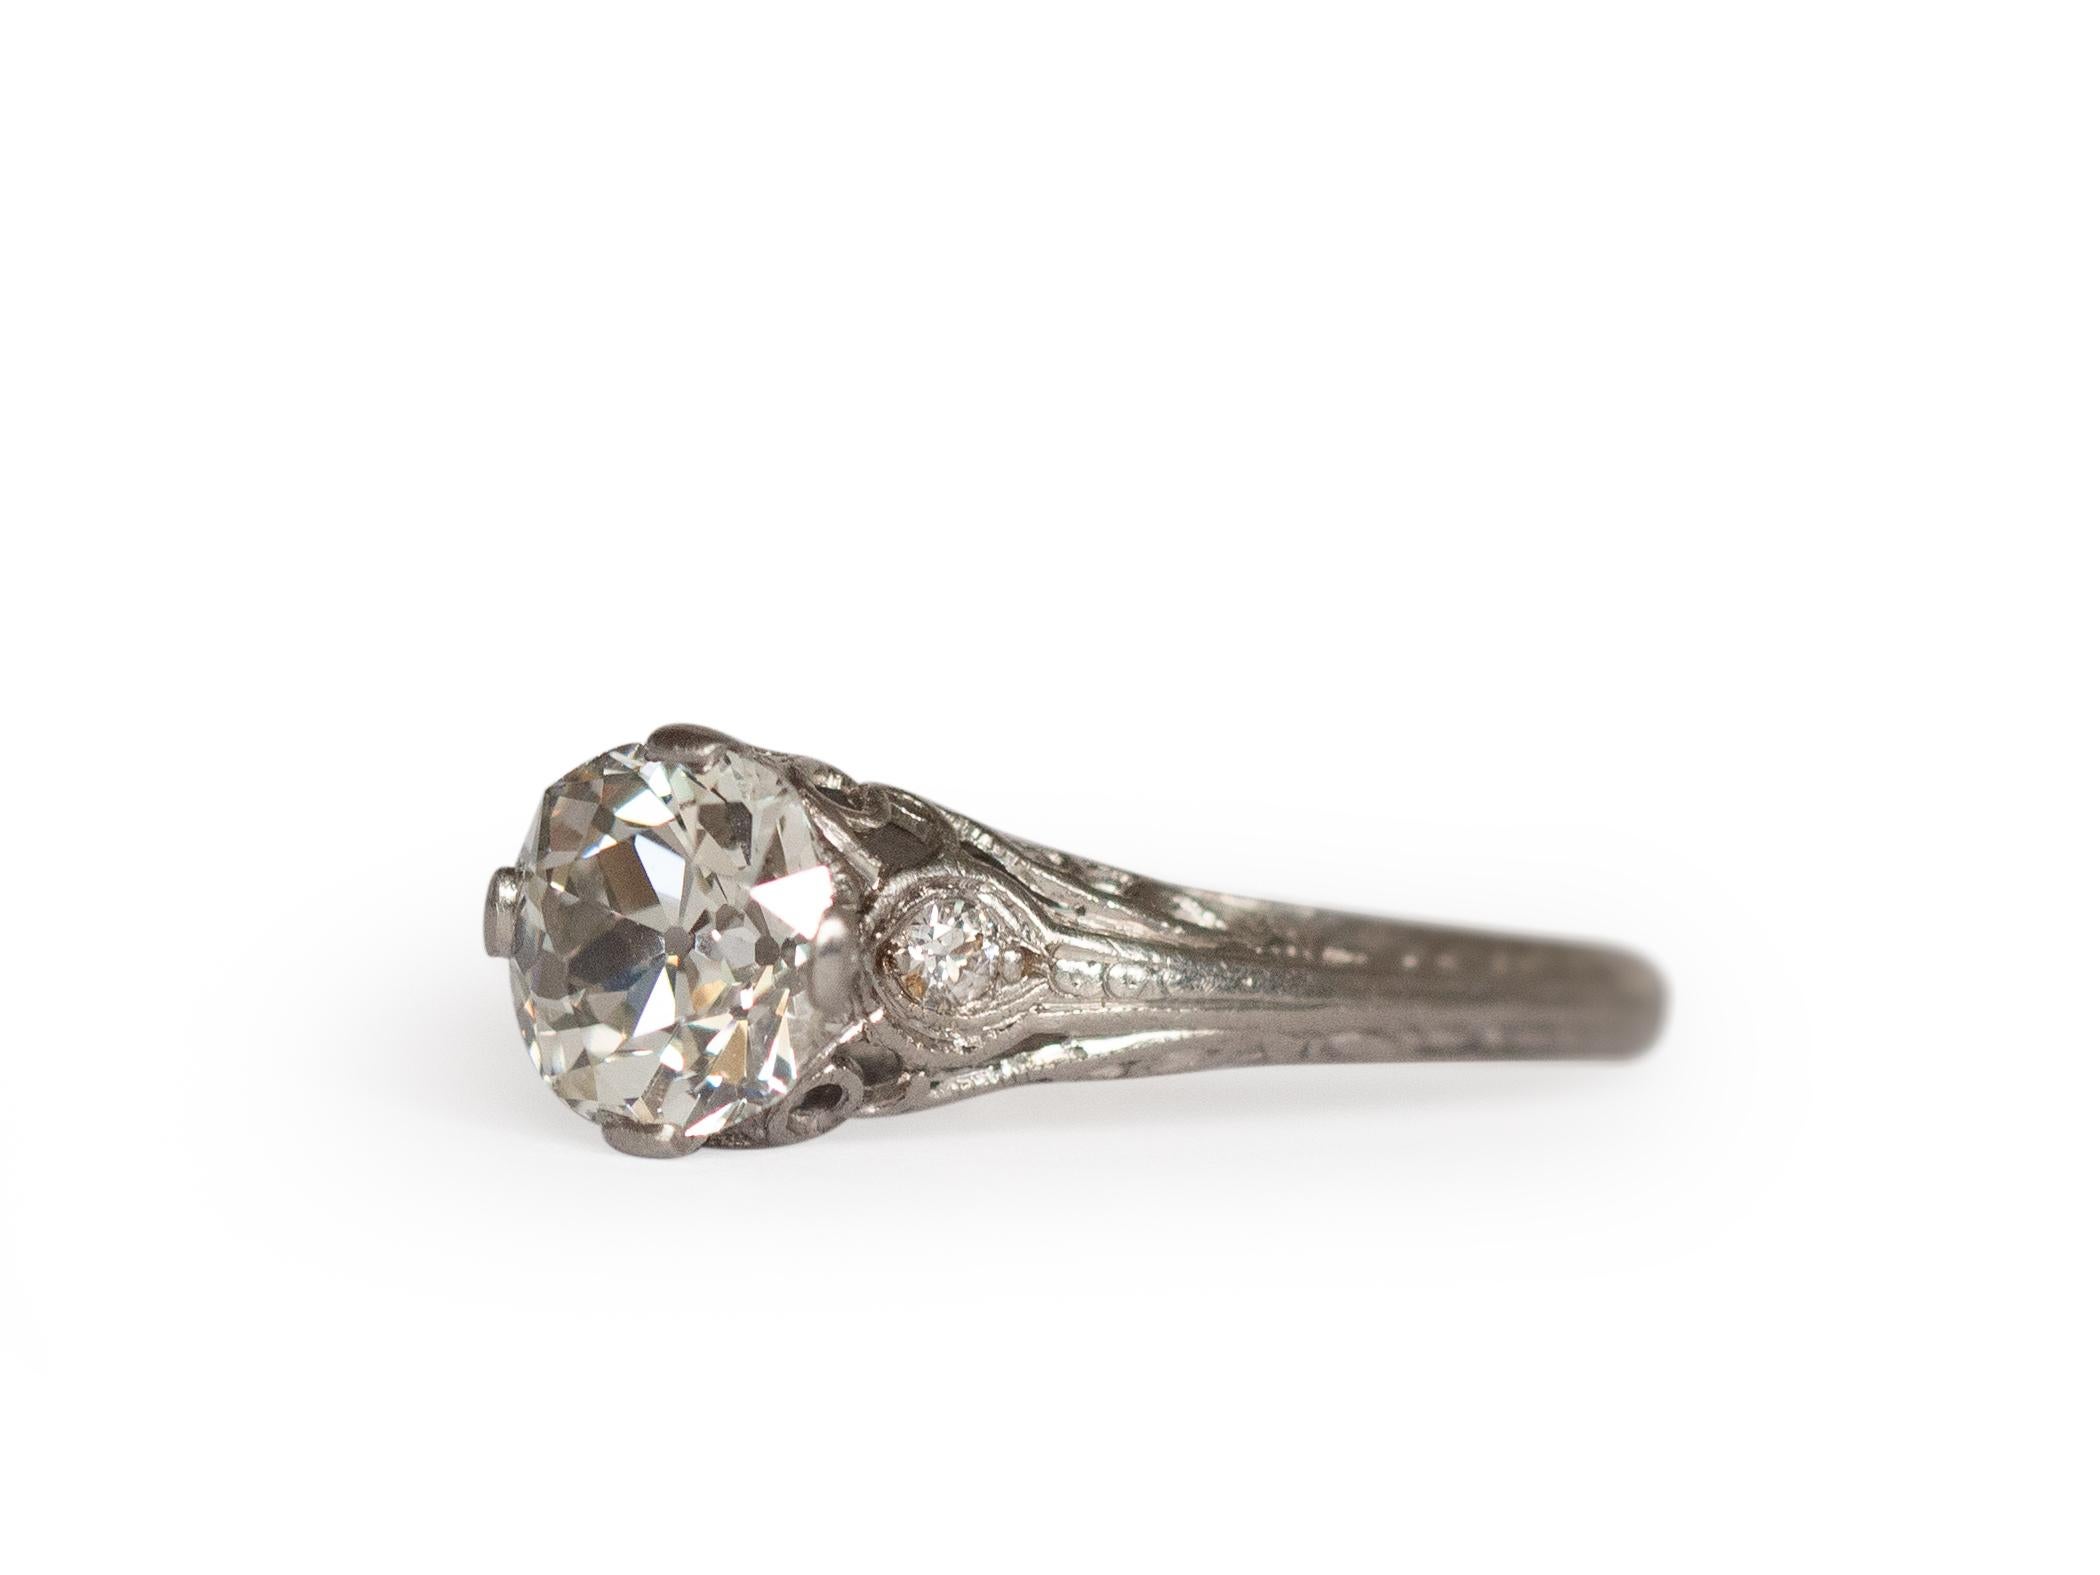 Item Details: 
Ring Size: 7.25
Metal Type: Platinum [Hallmarked, and Tested]
Weight: 3.0 grams

Center Diamond Details:
GIA REPORT #: 6213188147
Weight: 1.03 carat
Cut: Old Mine Brilliant (Antique Cushion)
Color: I
Clarity: VS1

Side Diamond